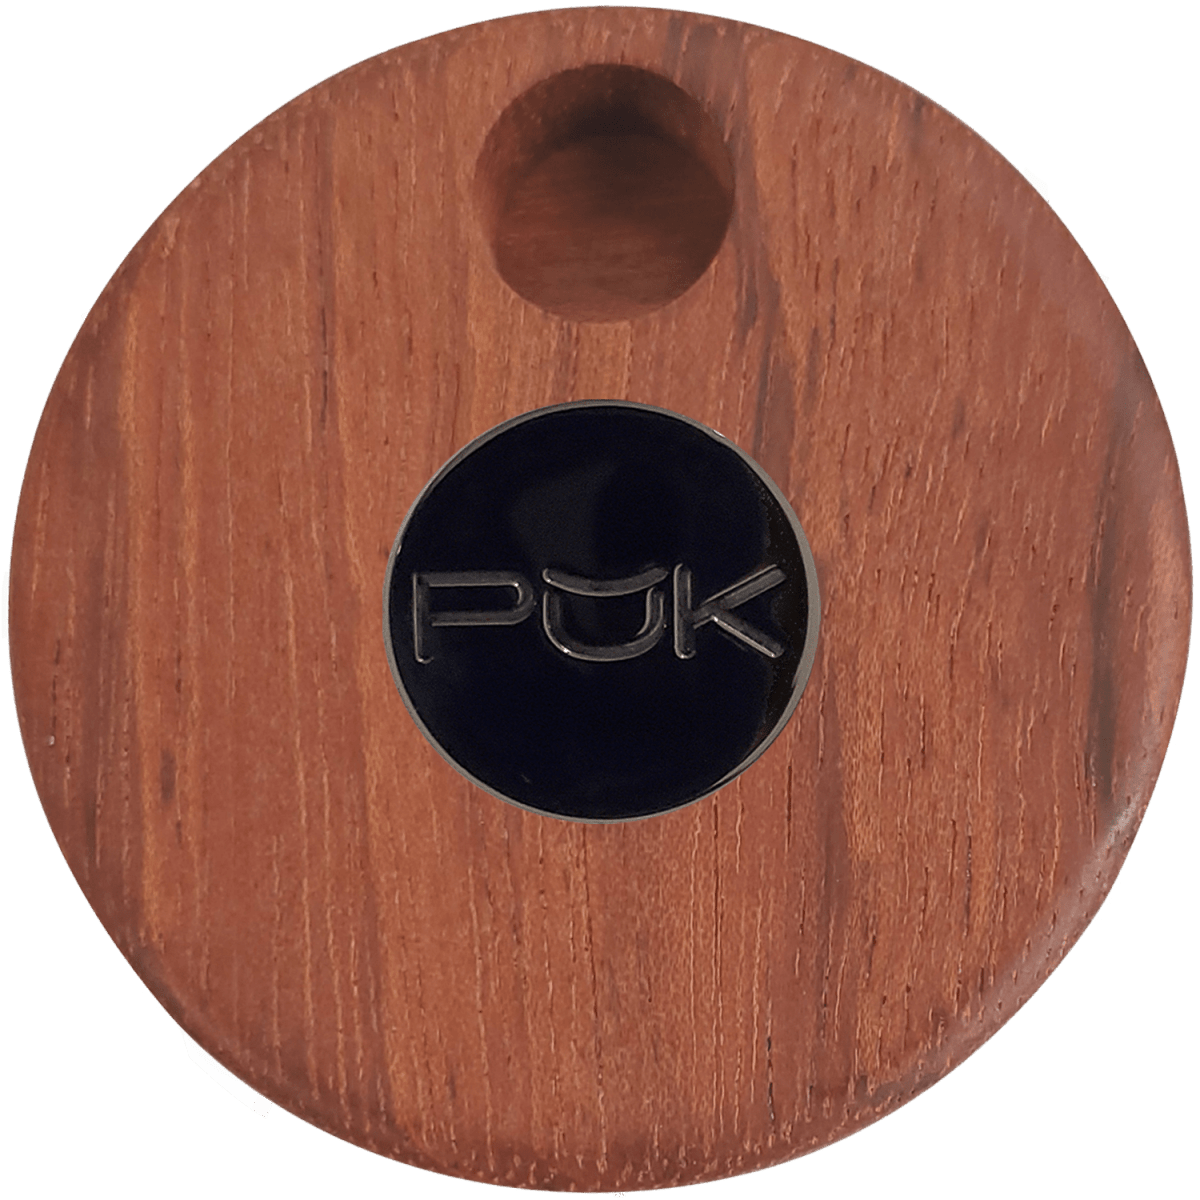 PUK ONLINE STORE Wood PŬK with Black Center Wood PŬK Cannabis Container and Smoking Device